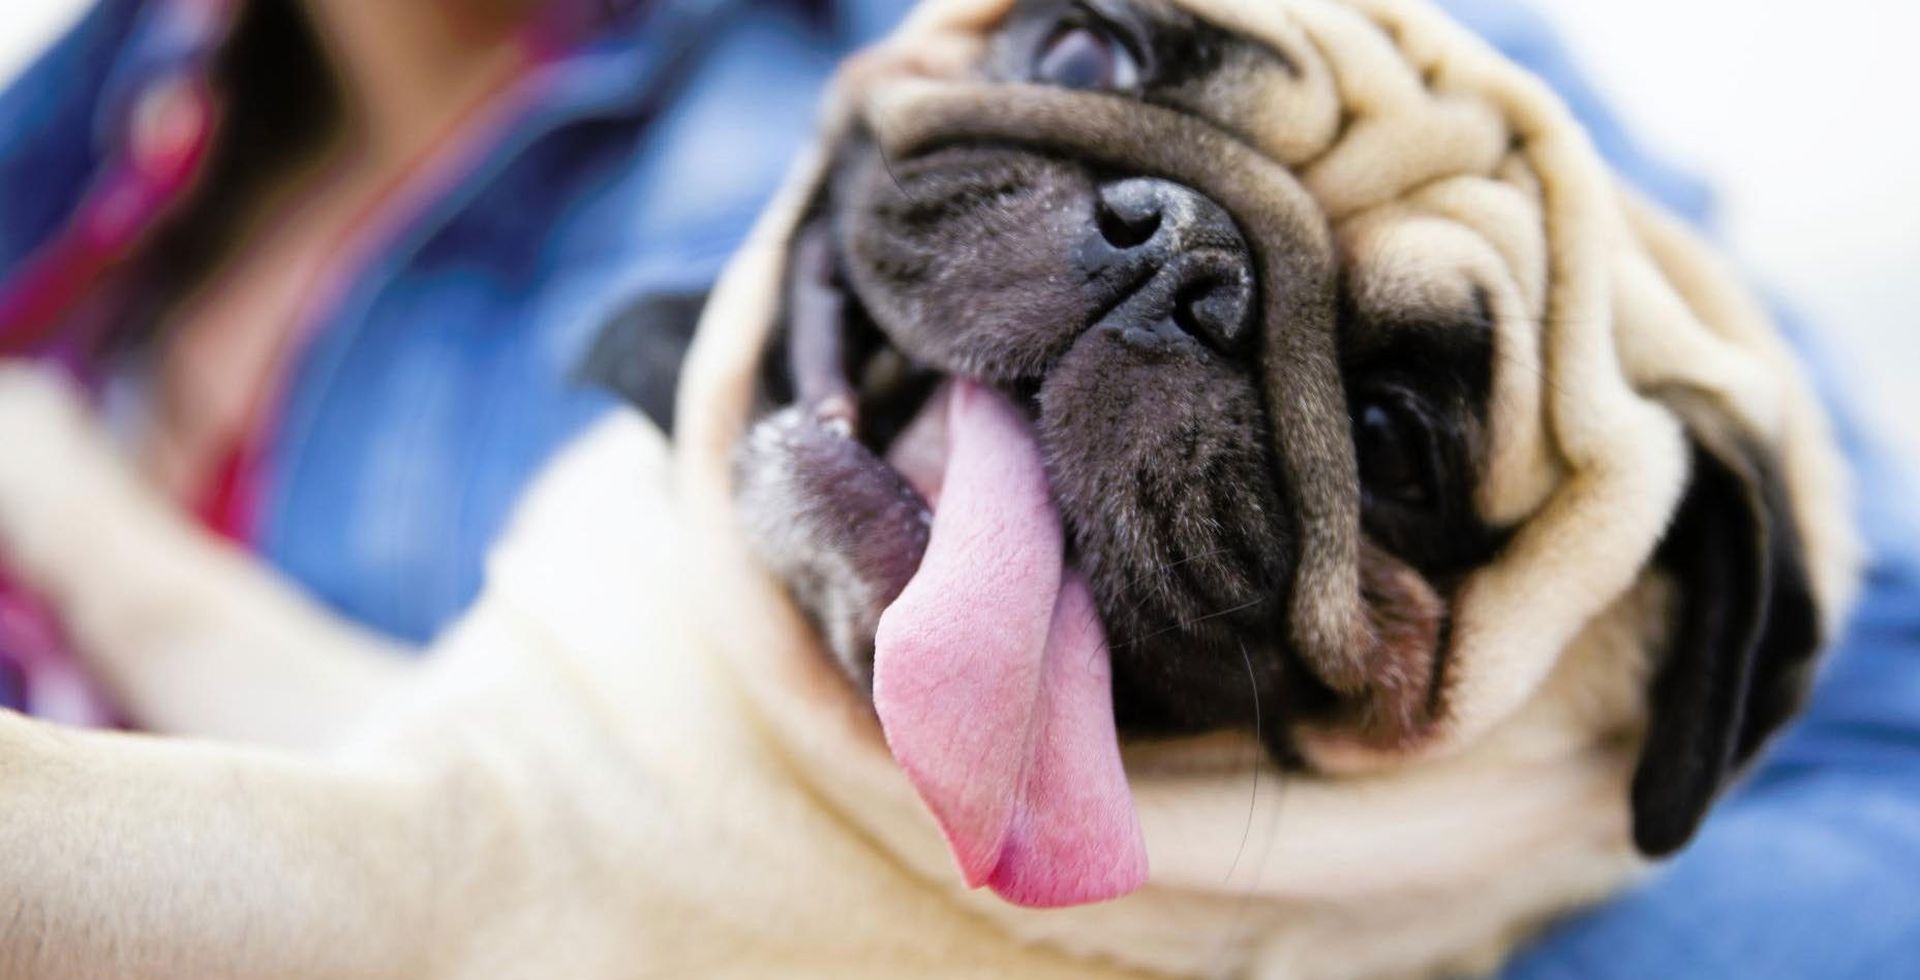 A pug with with his tongue hanging out and a blurred veterinary gown in the background